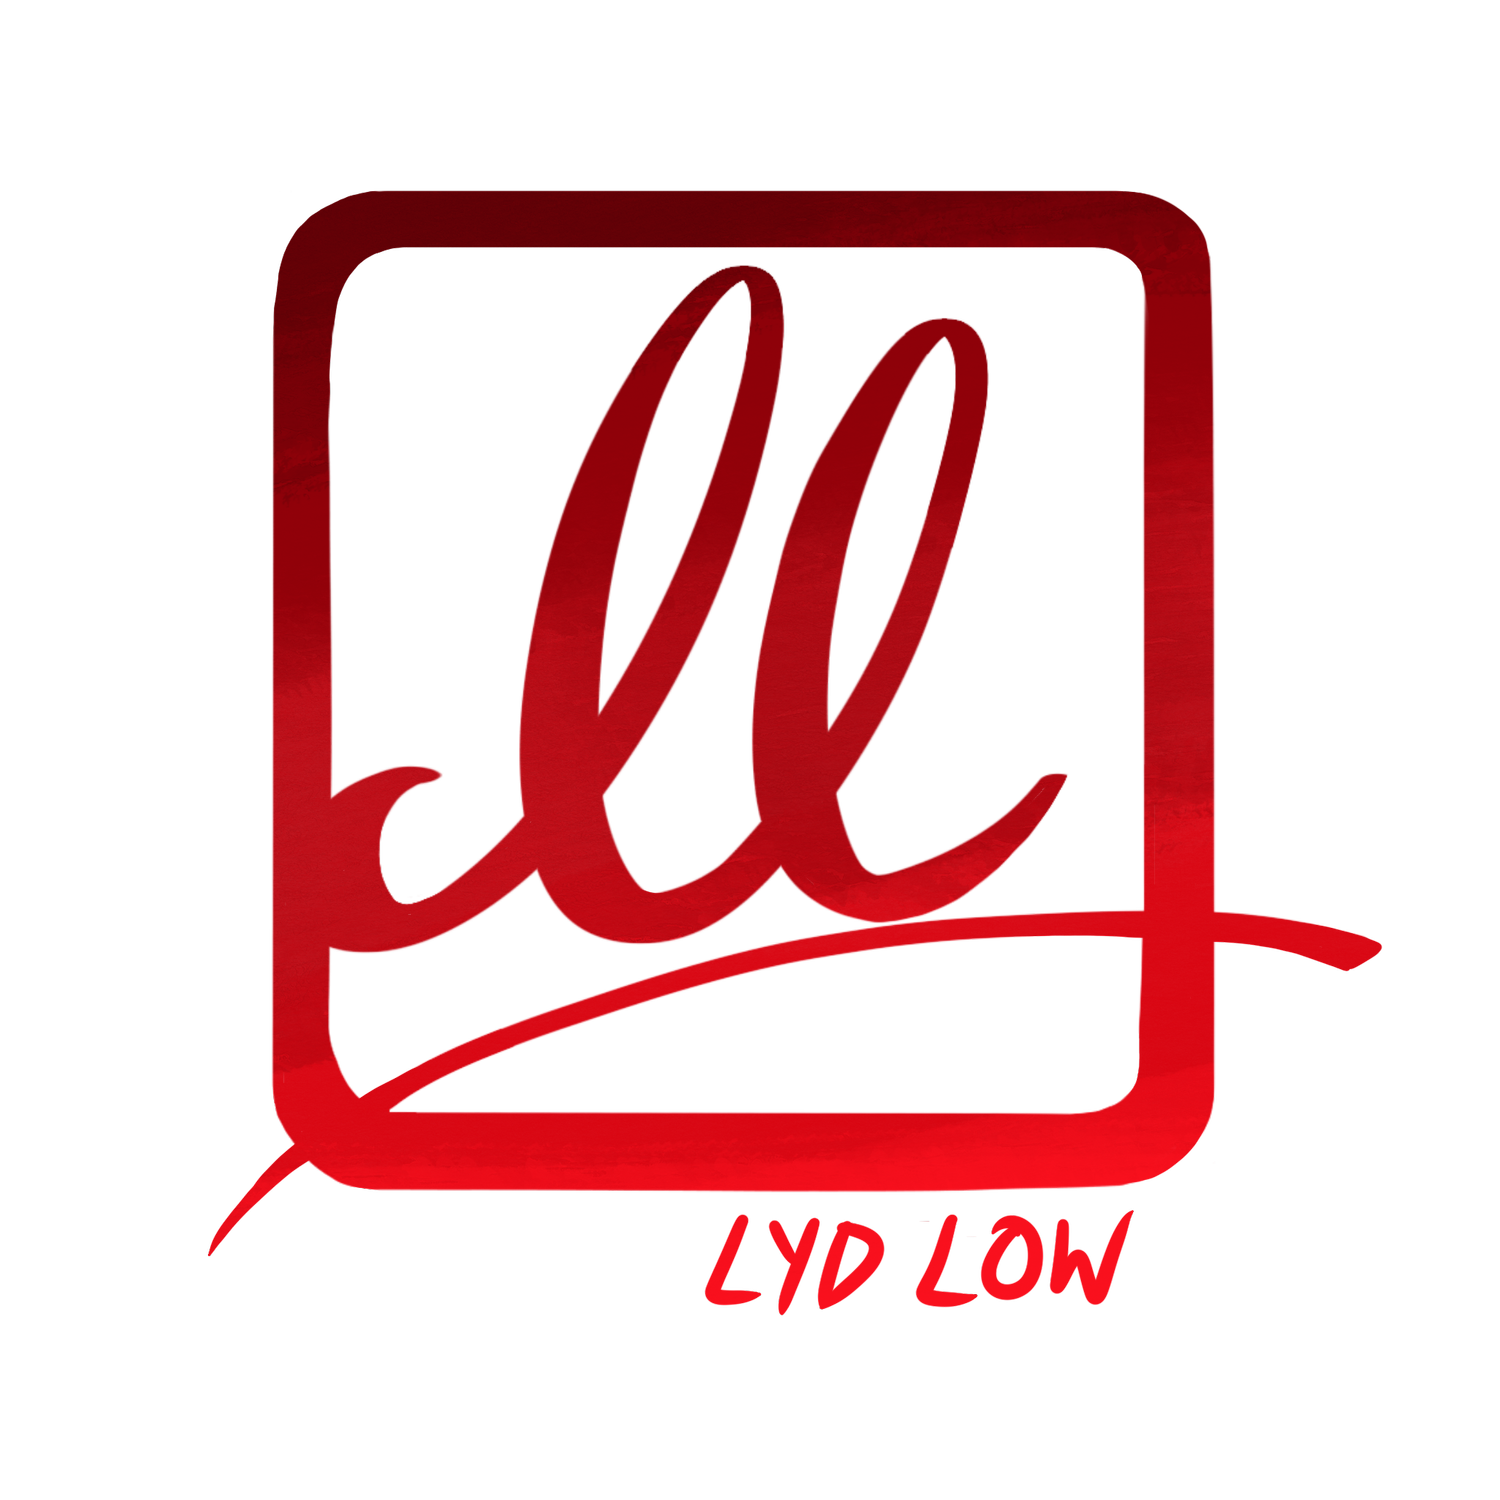 Lyd Low